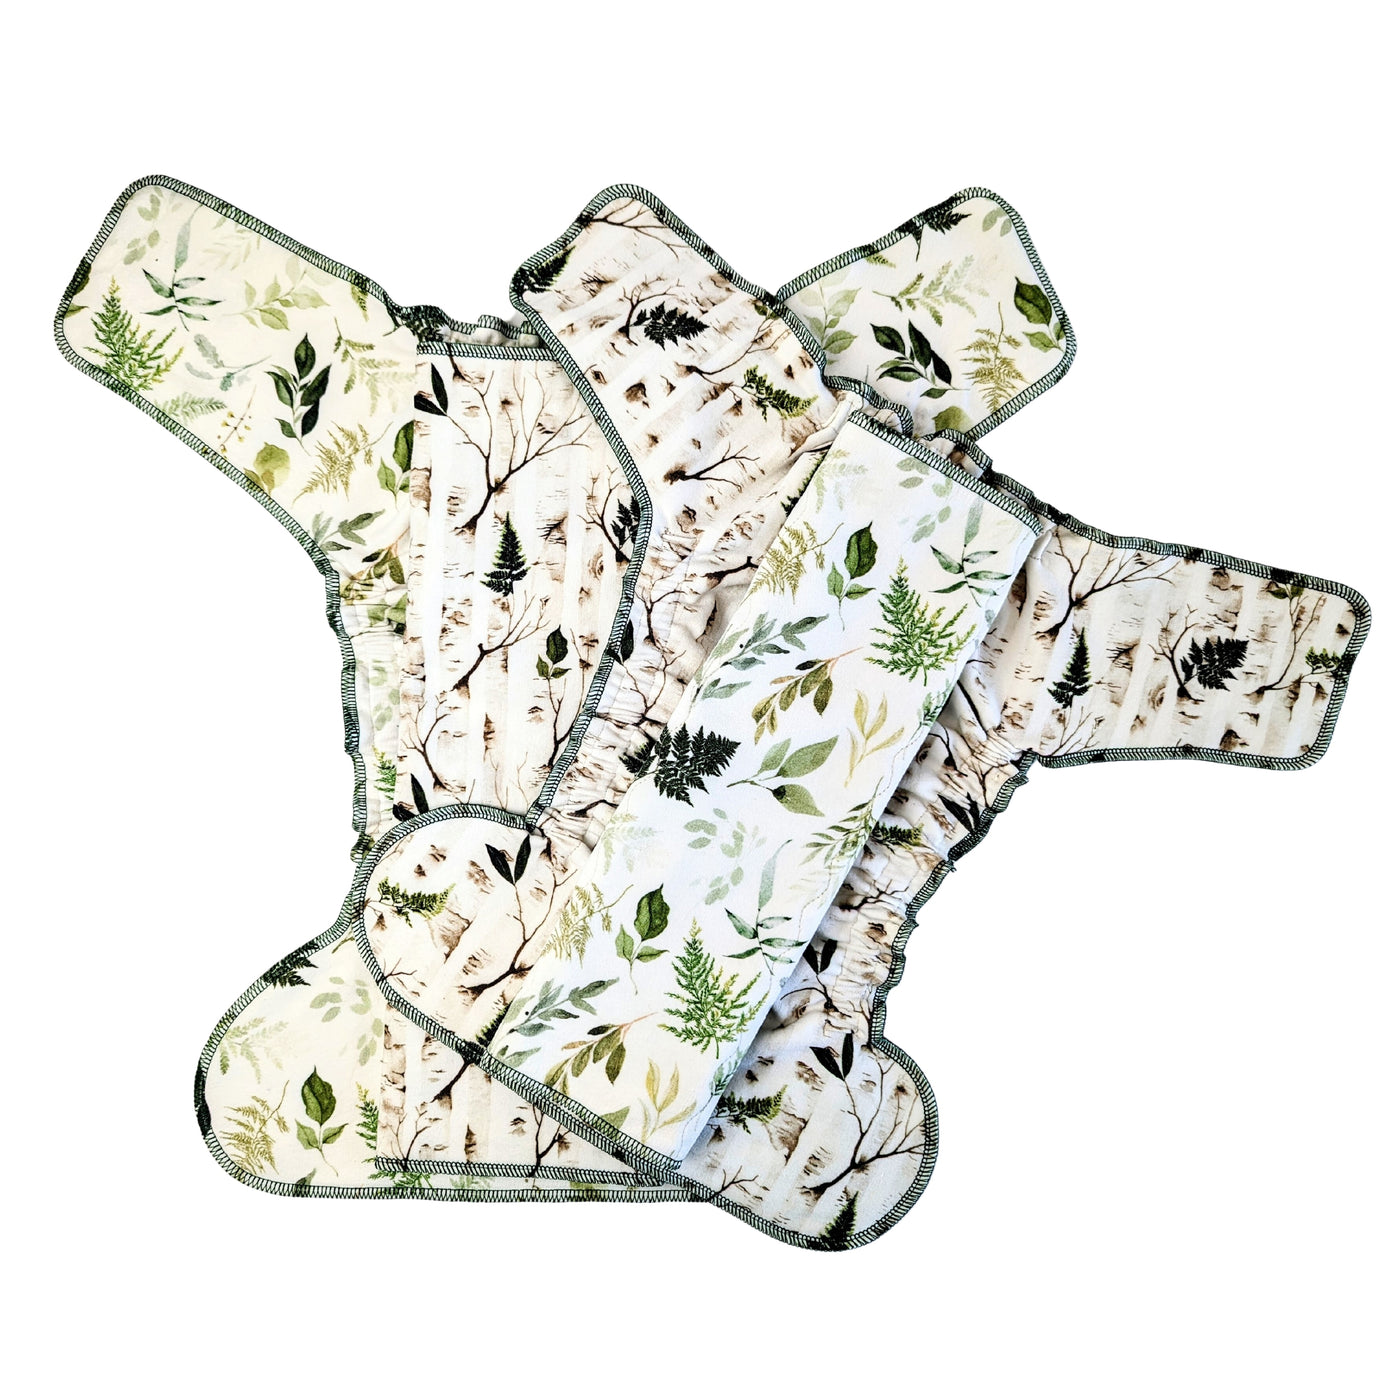 Stretchy Fitted Cloth Diaper | Organic Cotton | Regular Wetter Trifold Insert | Birch Tree Forest/Woodland Greenery Leaves